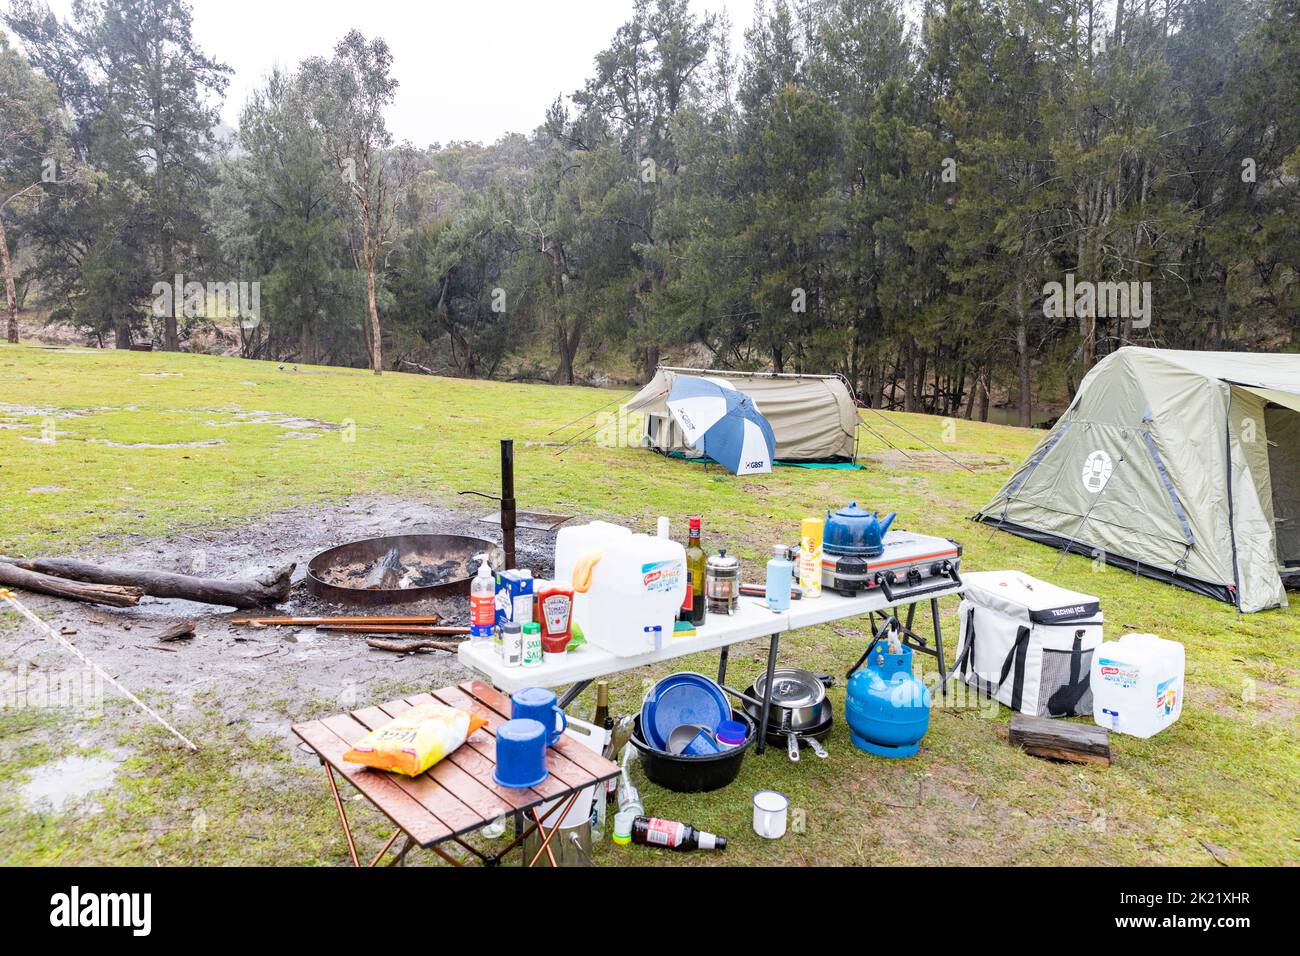 Australian camp site I na national park, Abercrombie river national park, camp kitchen set up and tents erected,New South Wales,Australia Stock Photo